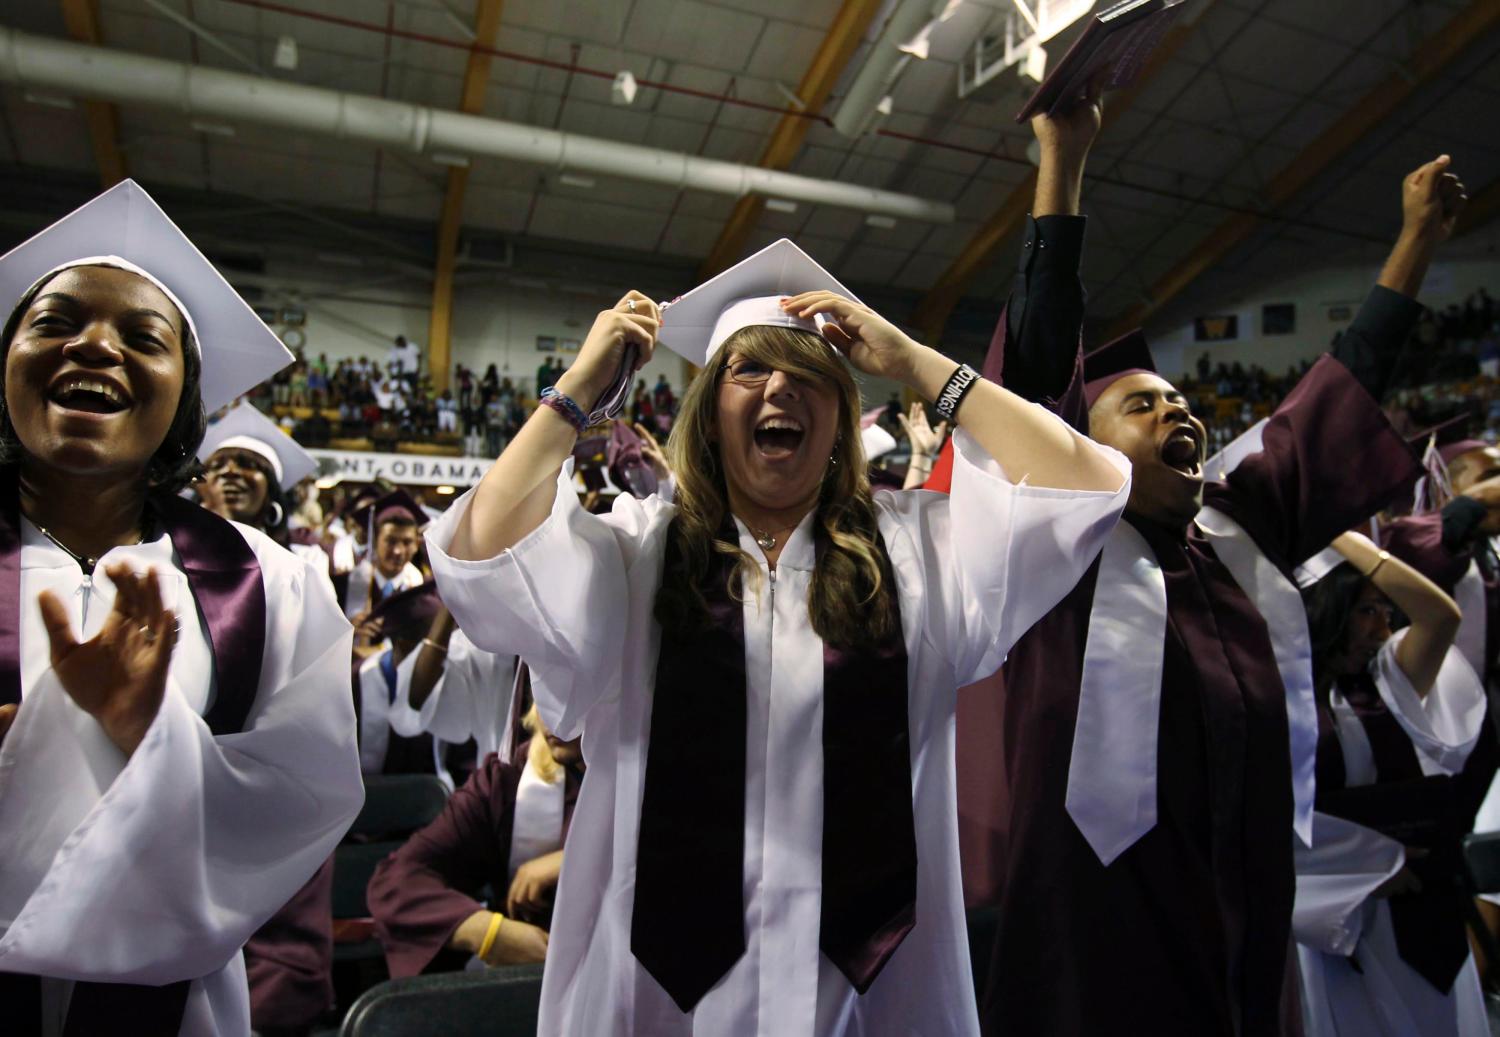 Students cheer as U.S. President Barack Obama attends the 2010 Kalamazoo Central High School graduation at Western Michigan University in Michigan, June 7, 2010.       REUTERS/Larry Downing (UNITED STATES - Tags: POLITICS EDUCATION) - GM1E6680PVY01